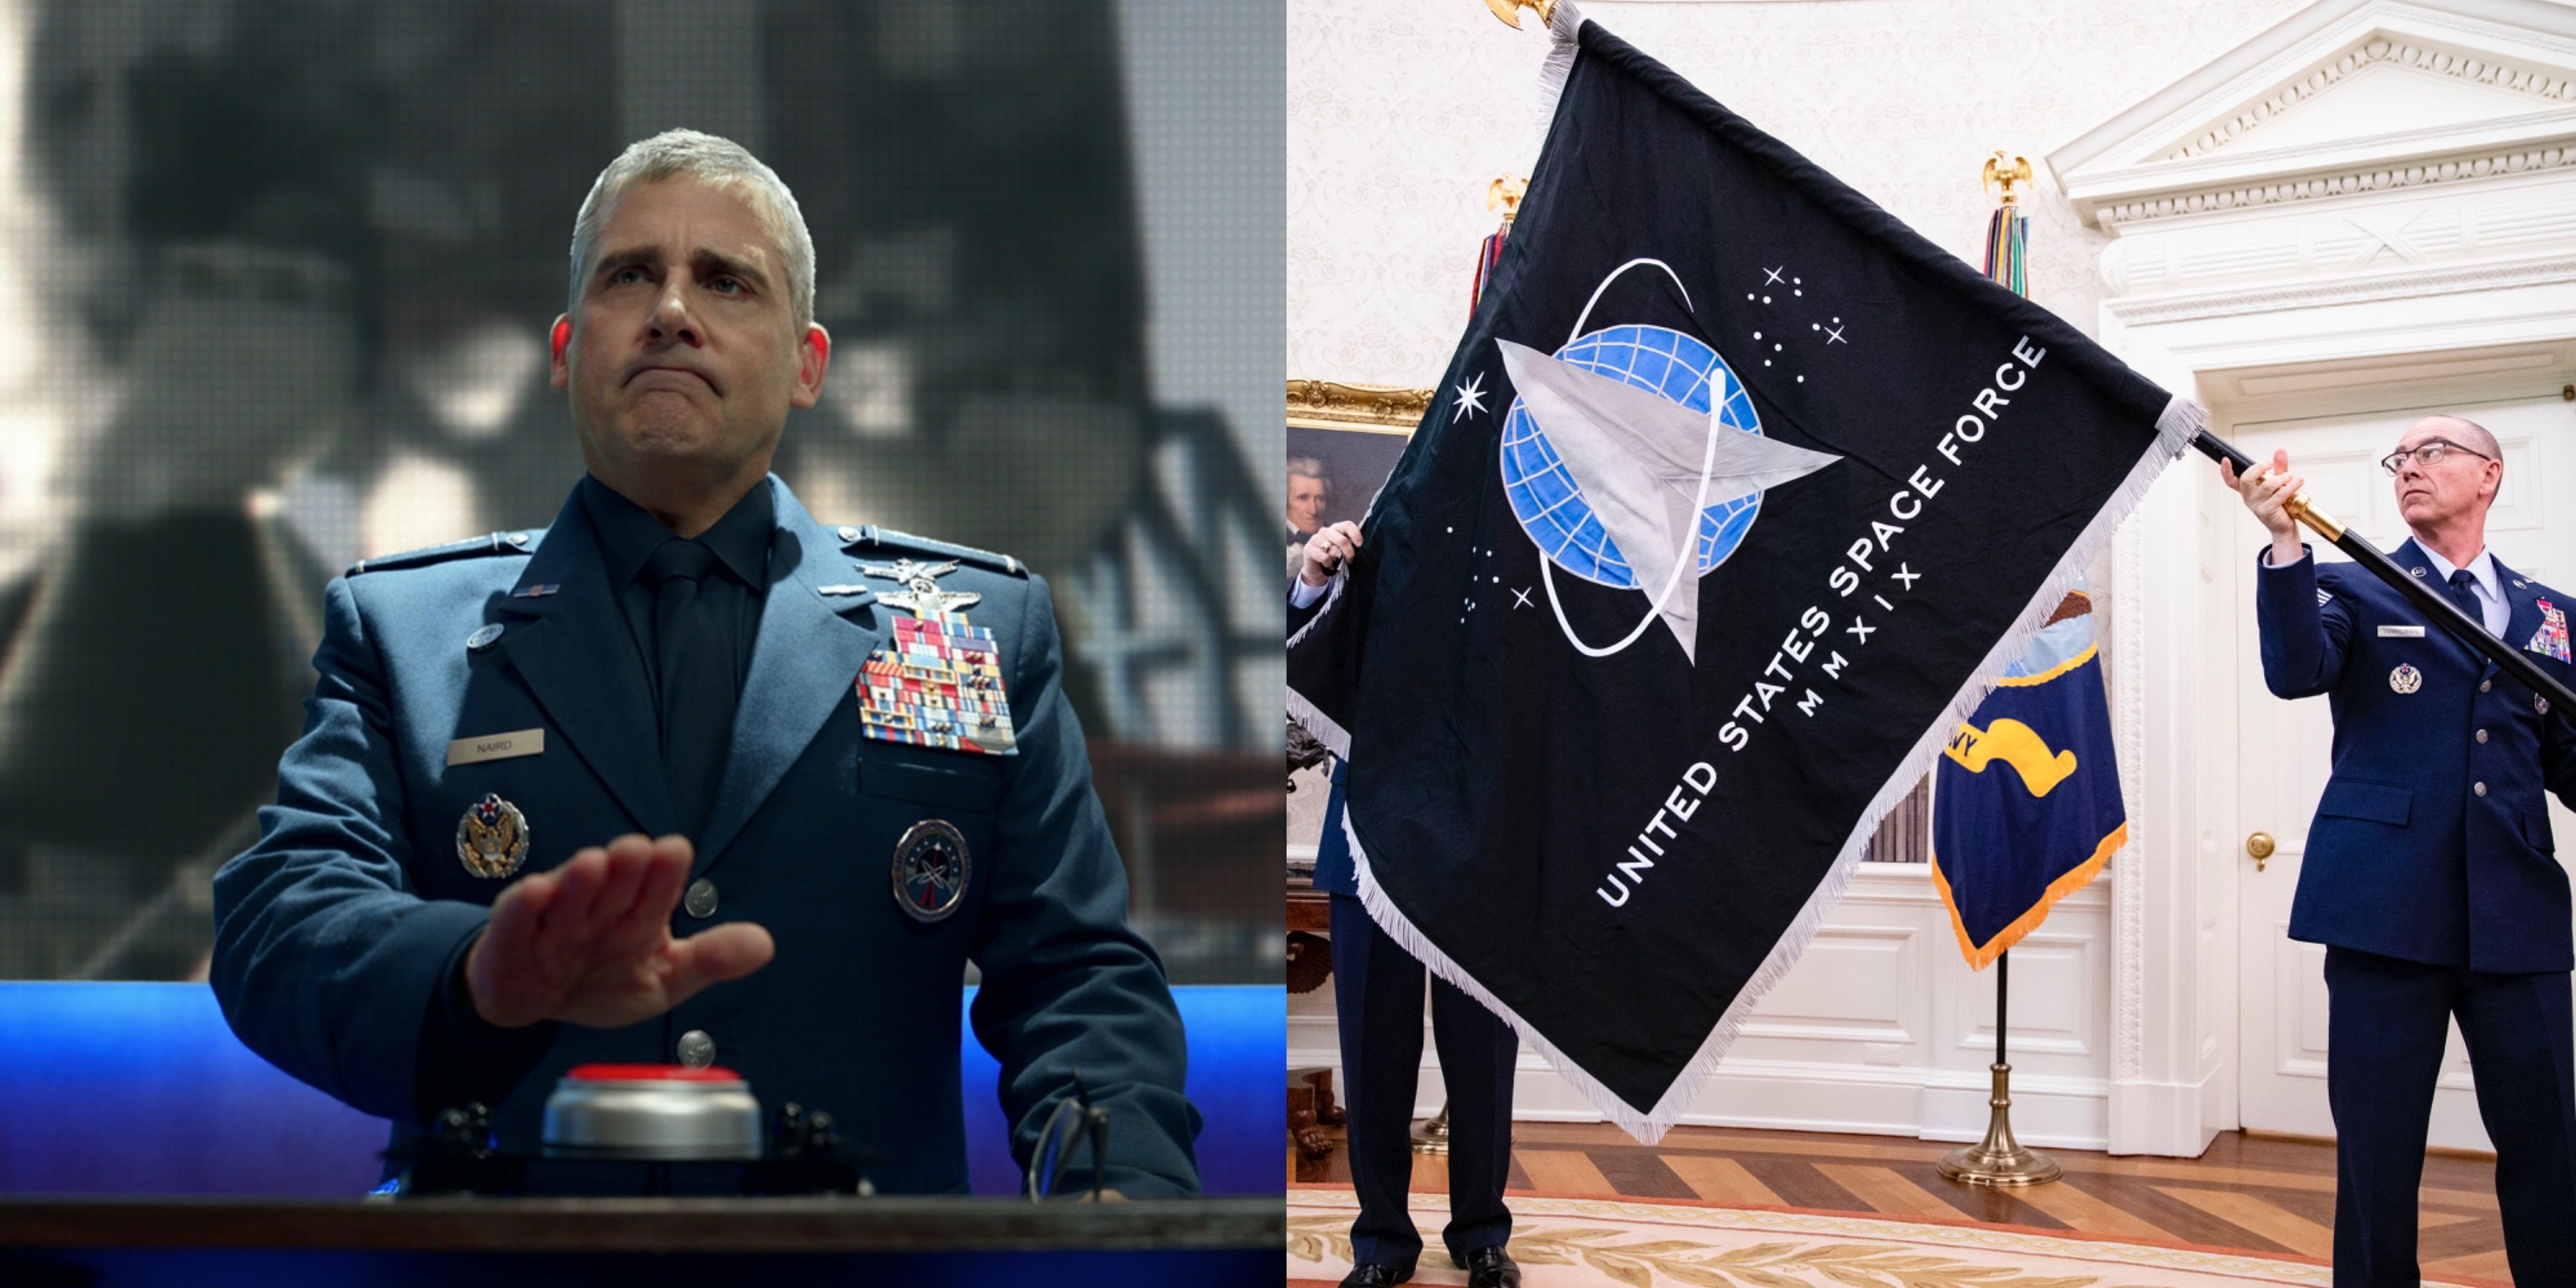 Is Netflix S Space Force Show Inspired By The Real Military Branch